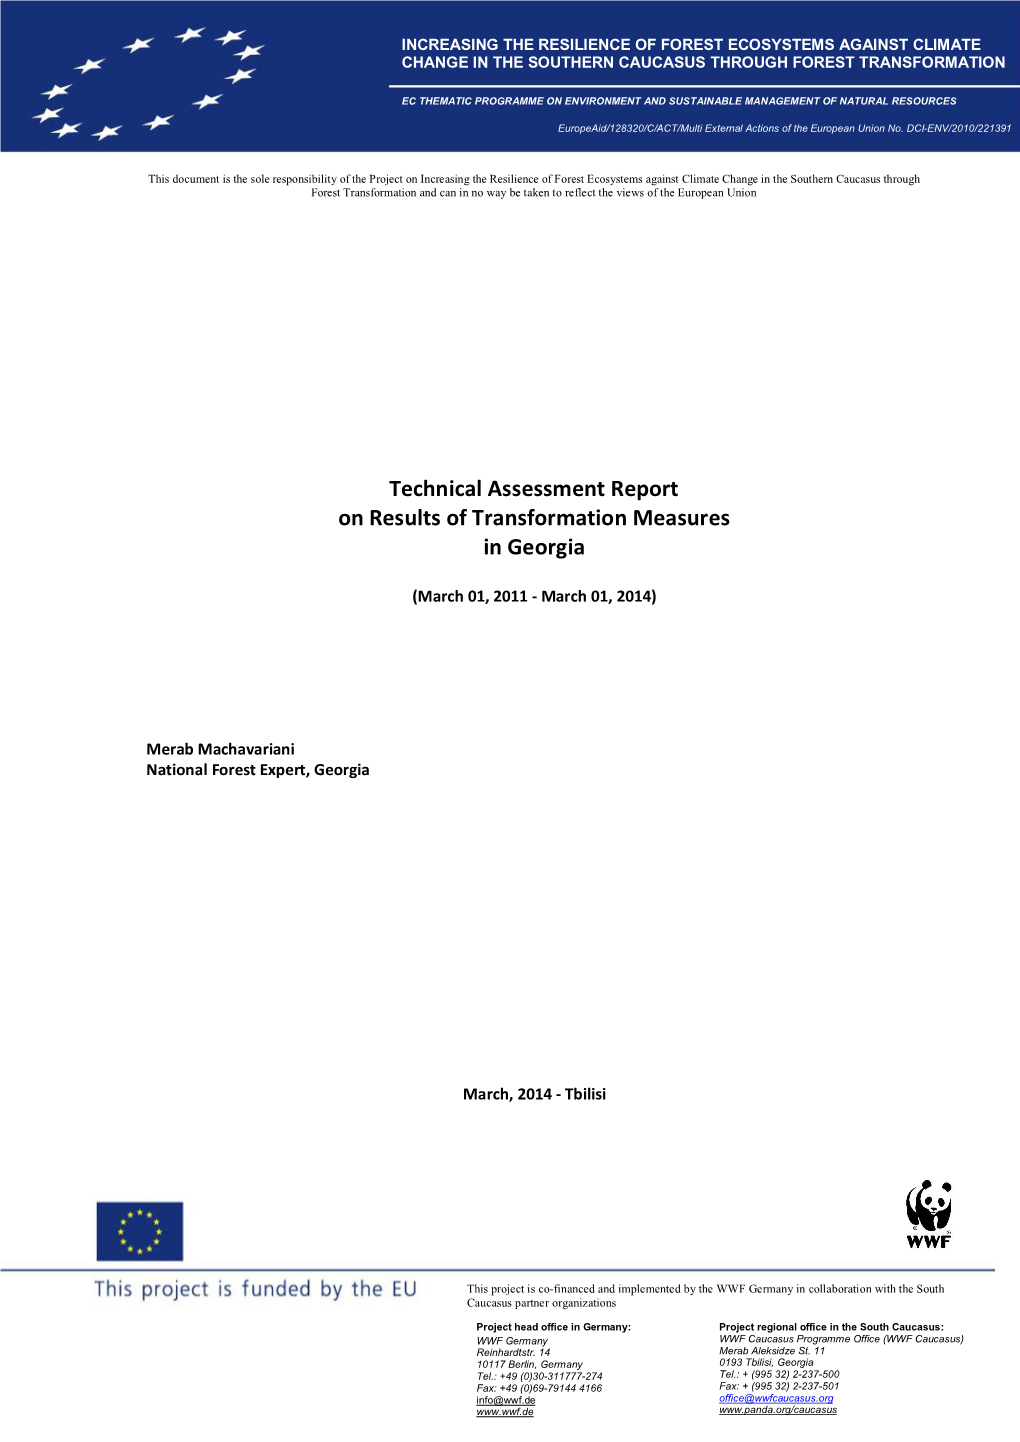 Technical Assessment Report on Results of Transformation Measures in Georgia